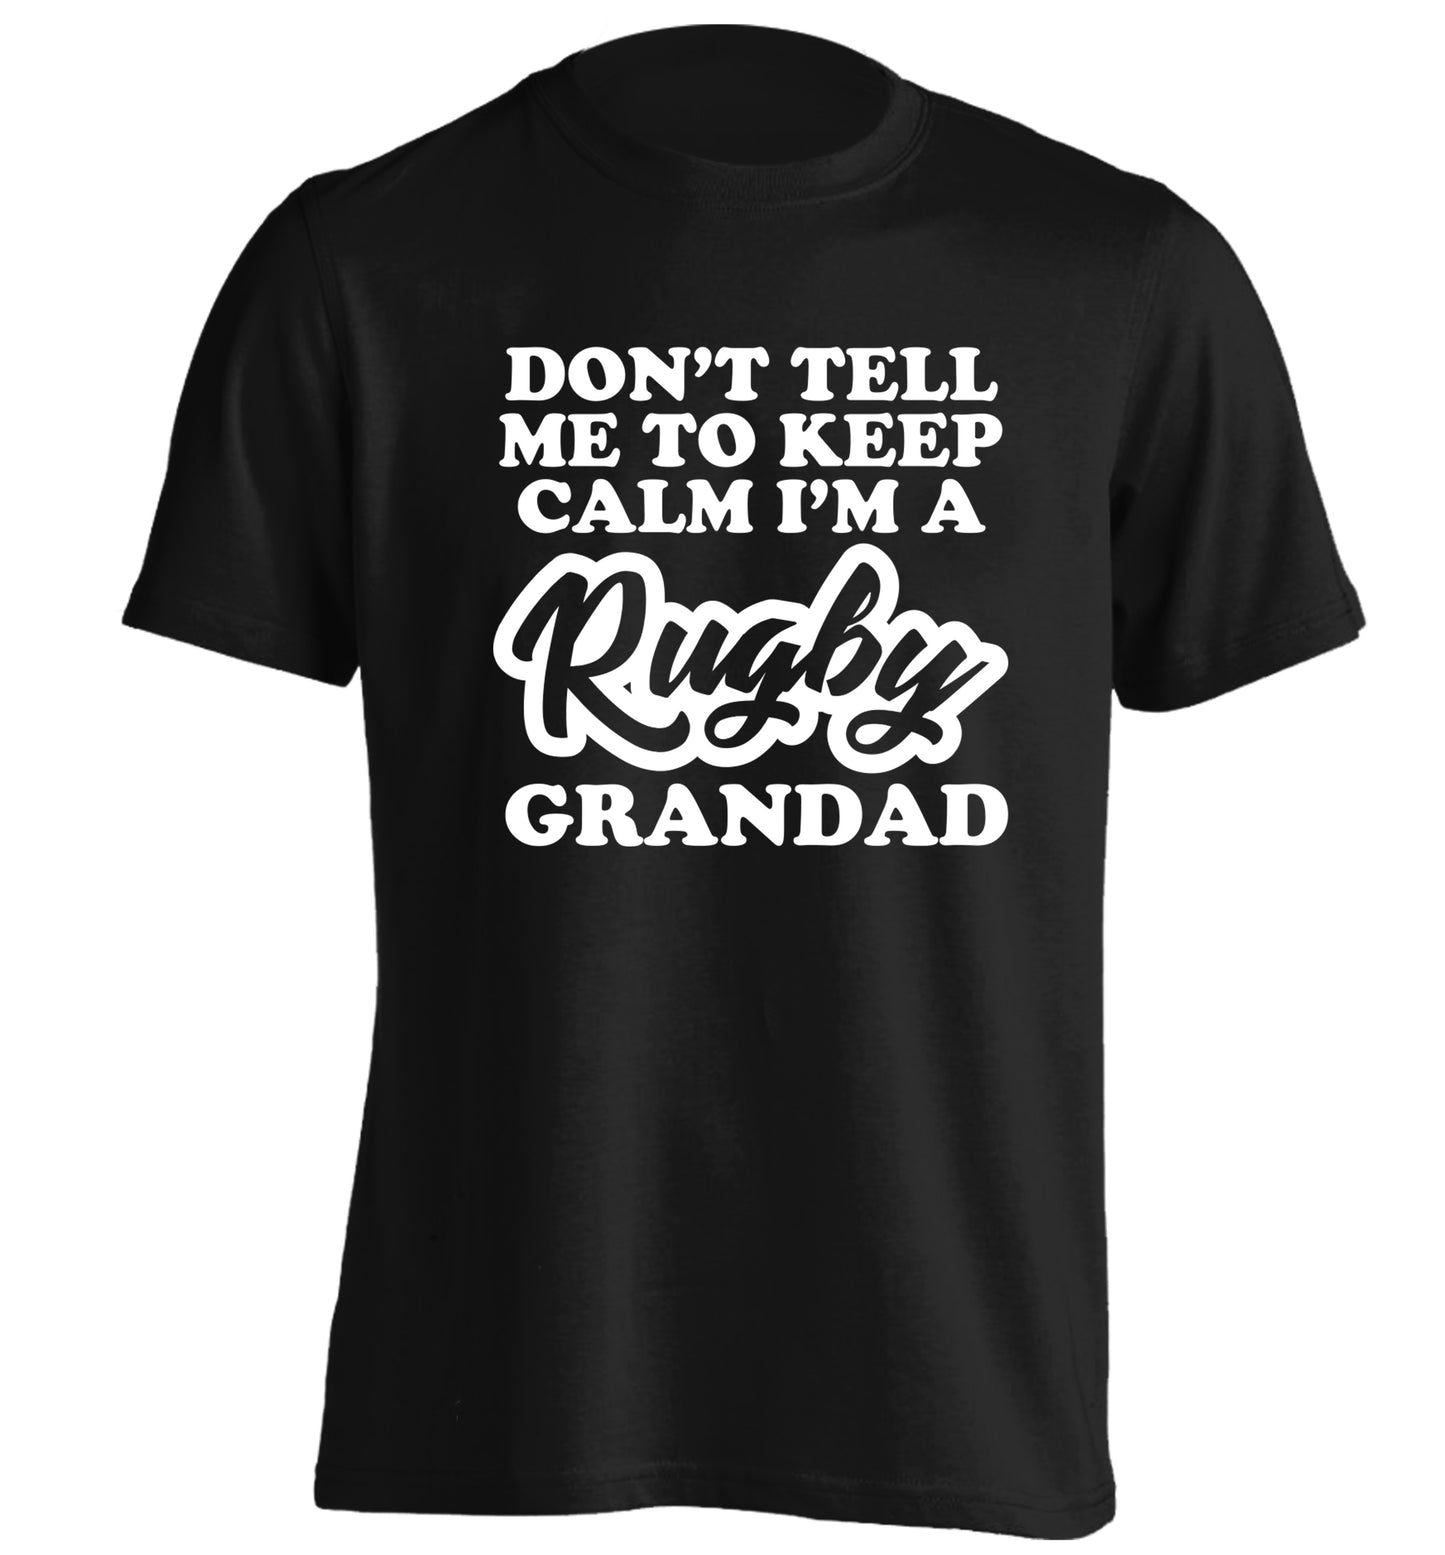 Don't tell me to keep calm I'm a rugby dad adults unisex black Tshirt 2XL